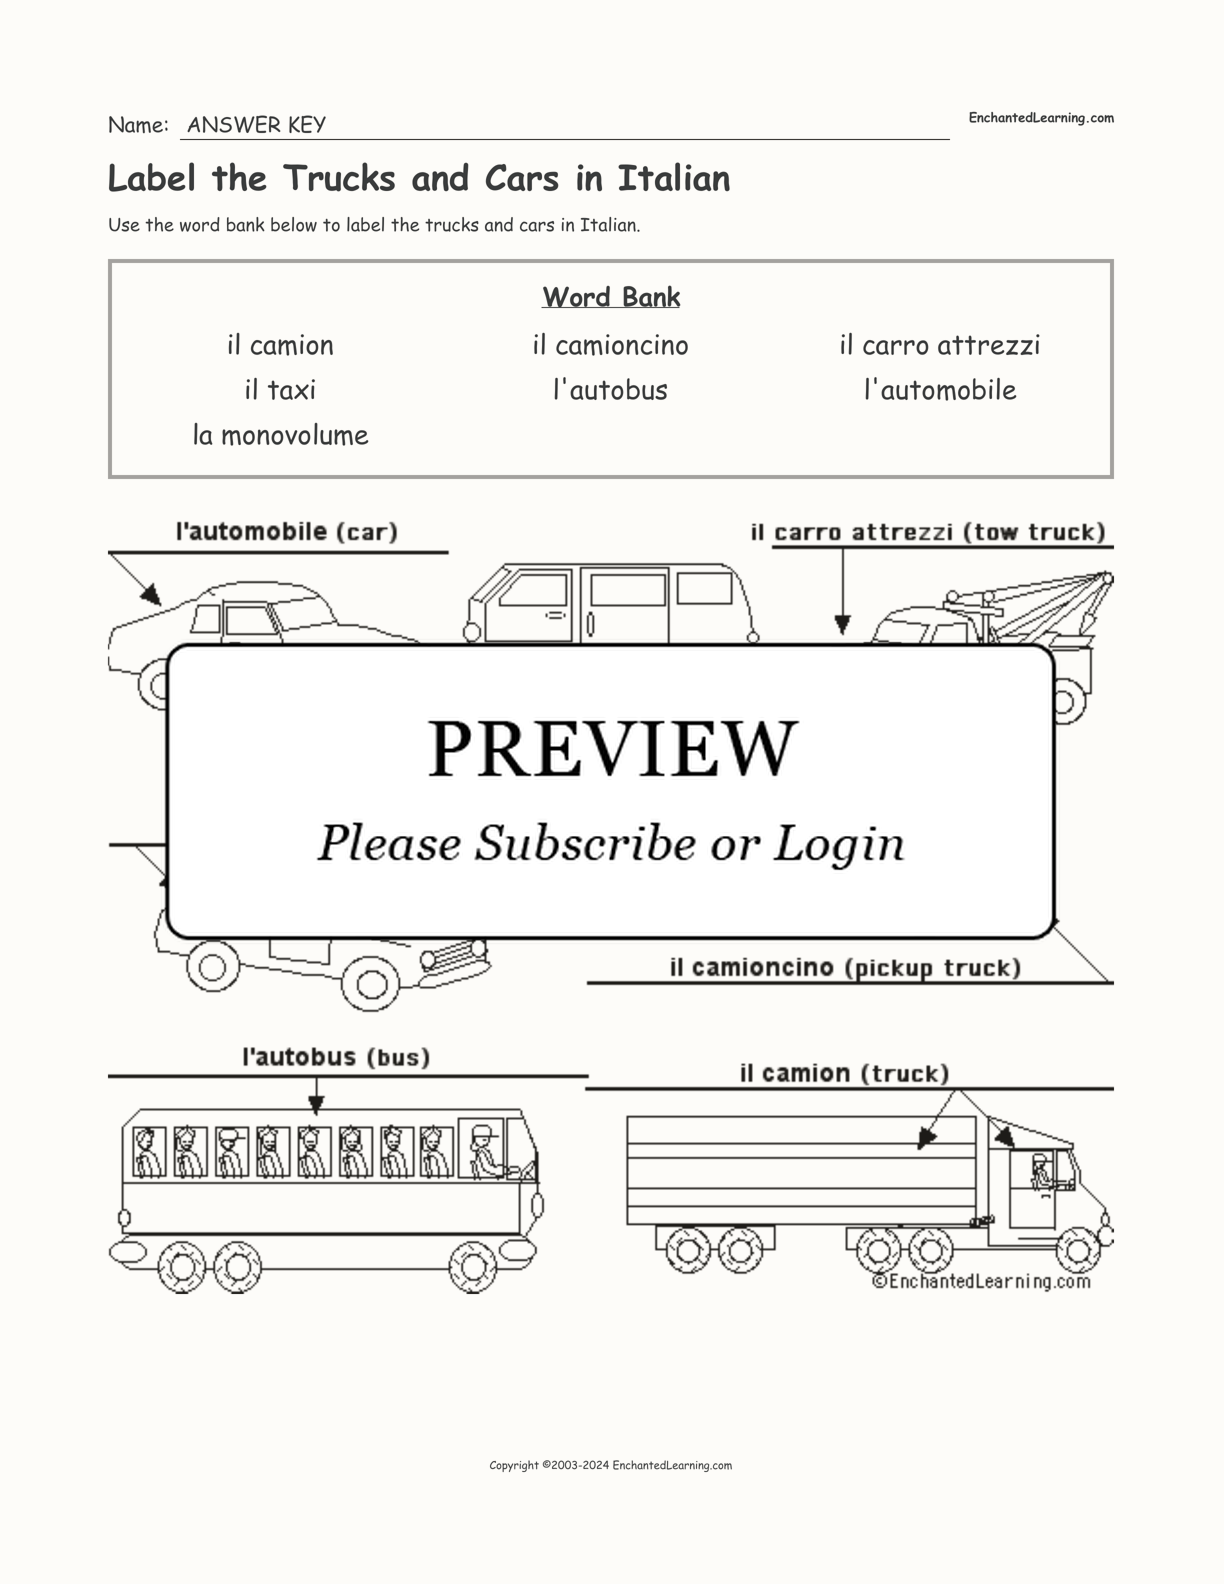 Label the Trucks and Cars in Italian interactive worksheet page 2